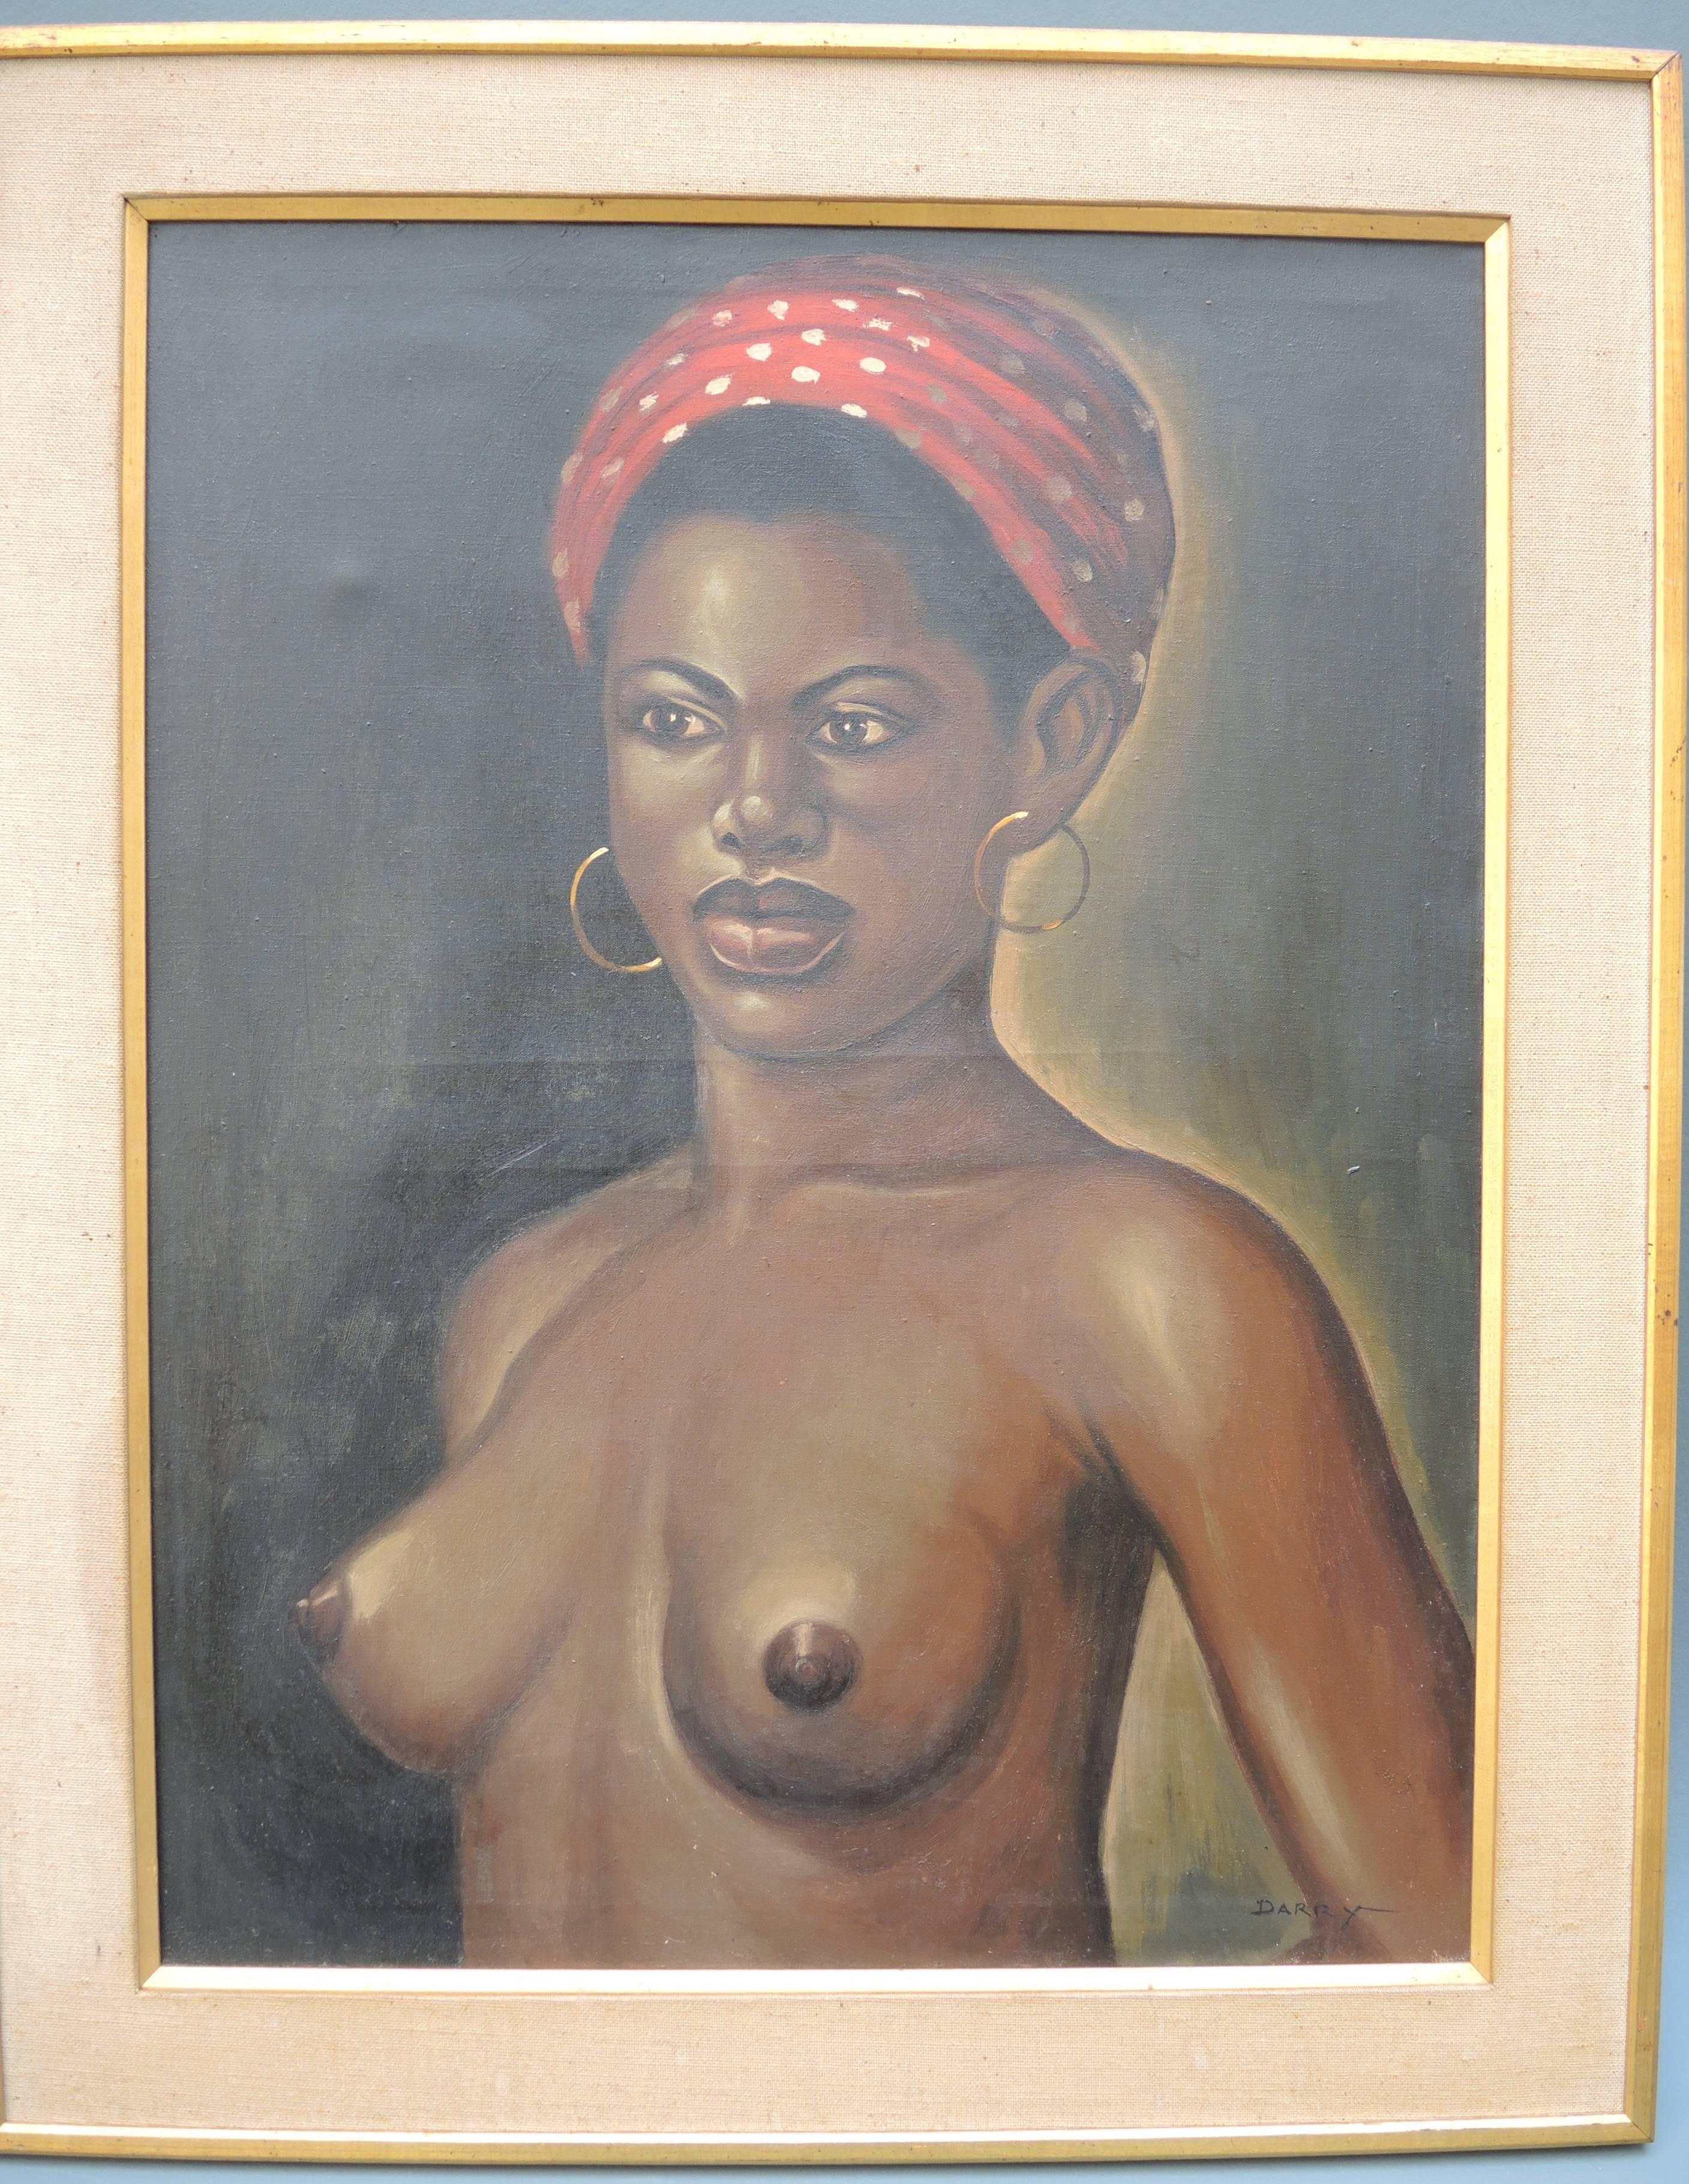 Vintage painting on canvas painted by the French painter Guy Darry of a lovely young black creole woman.
Original frame of giltwood and linen.